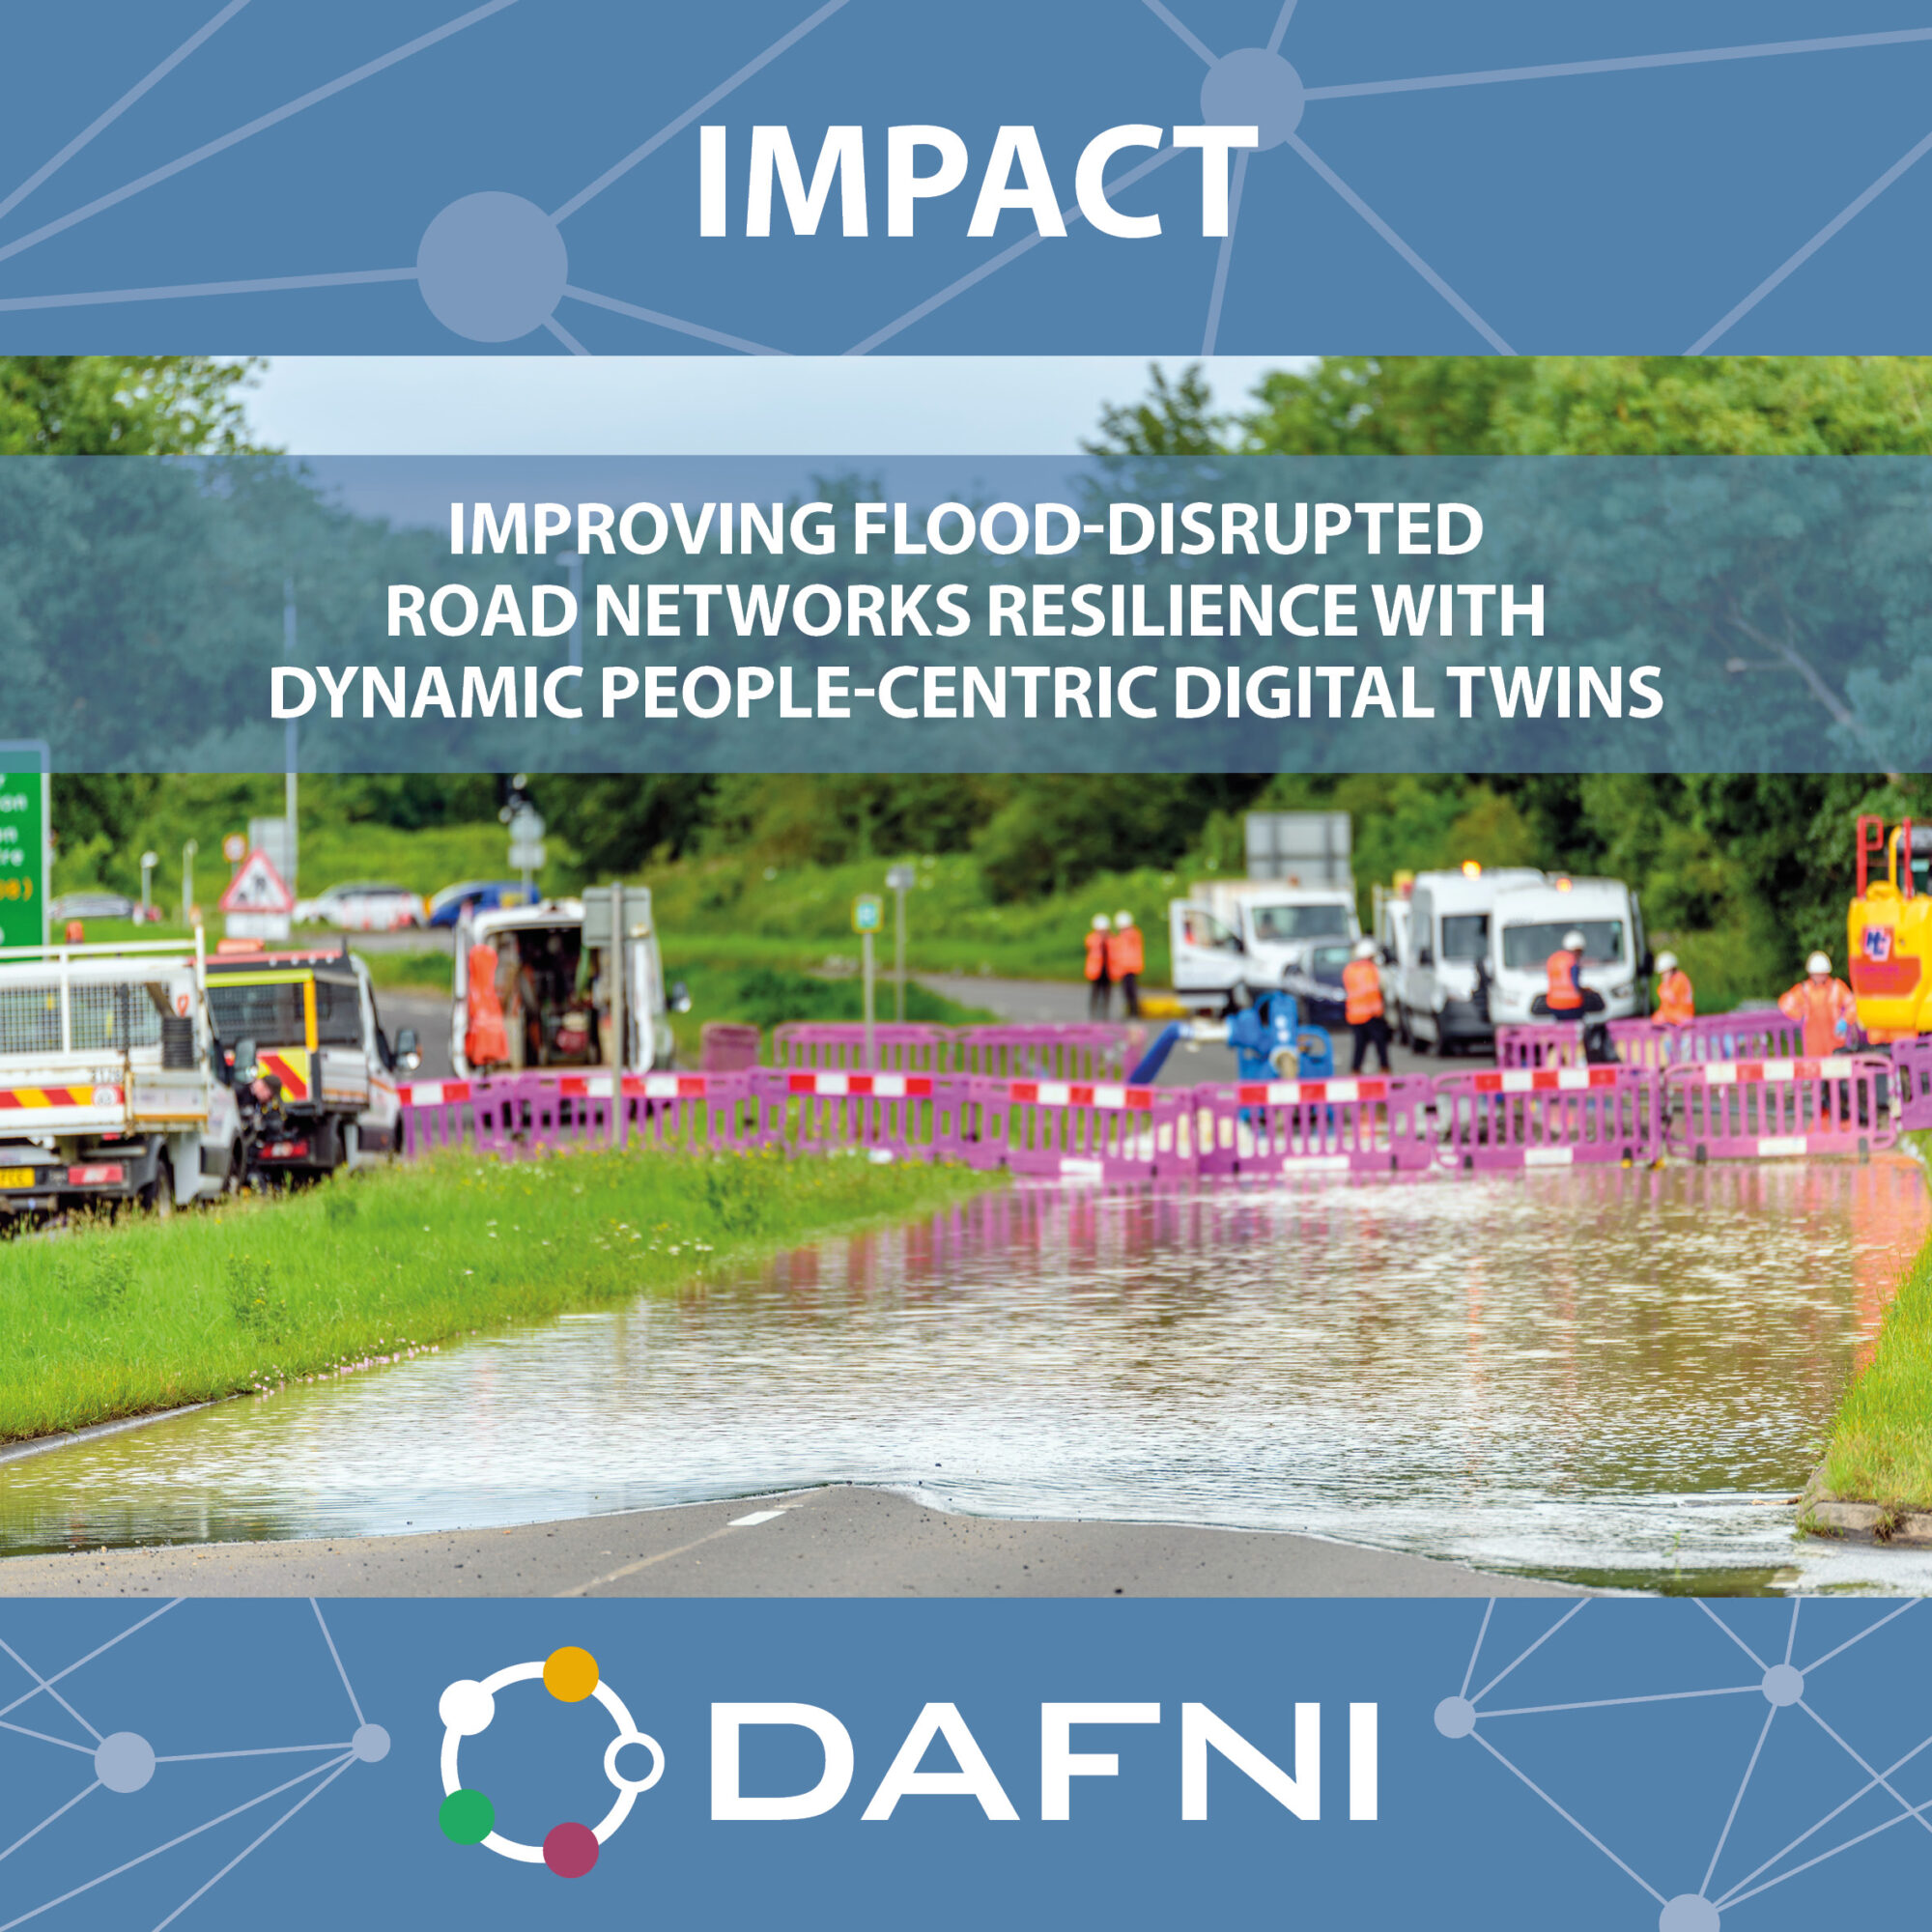 IMPACT Improving flood-disrupted road networks resilience with dynamic people-centric digital twins